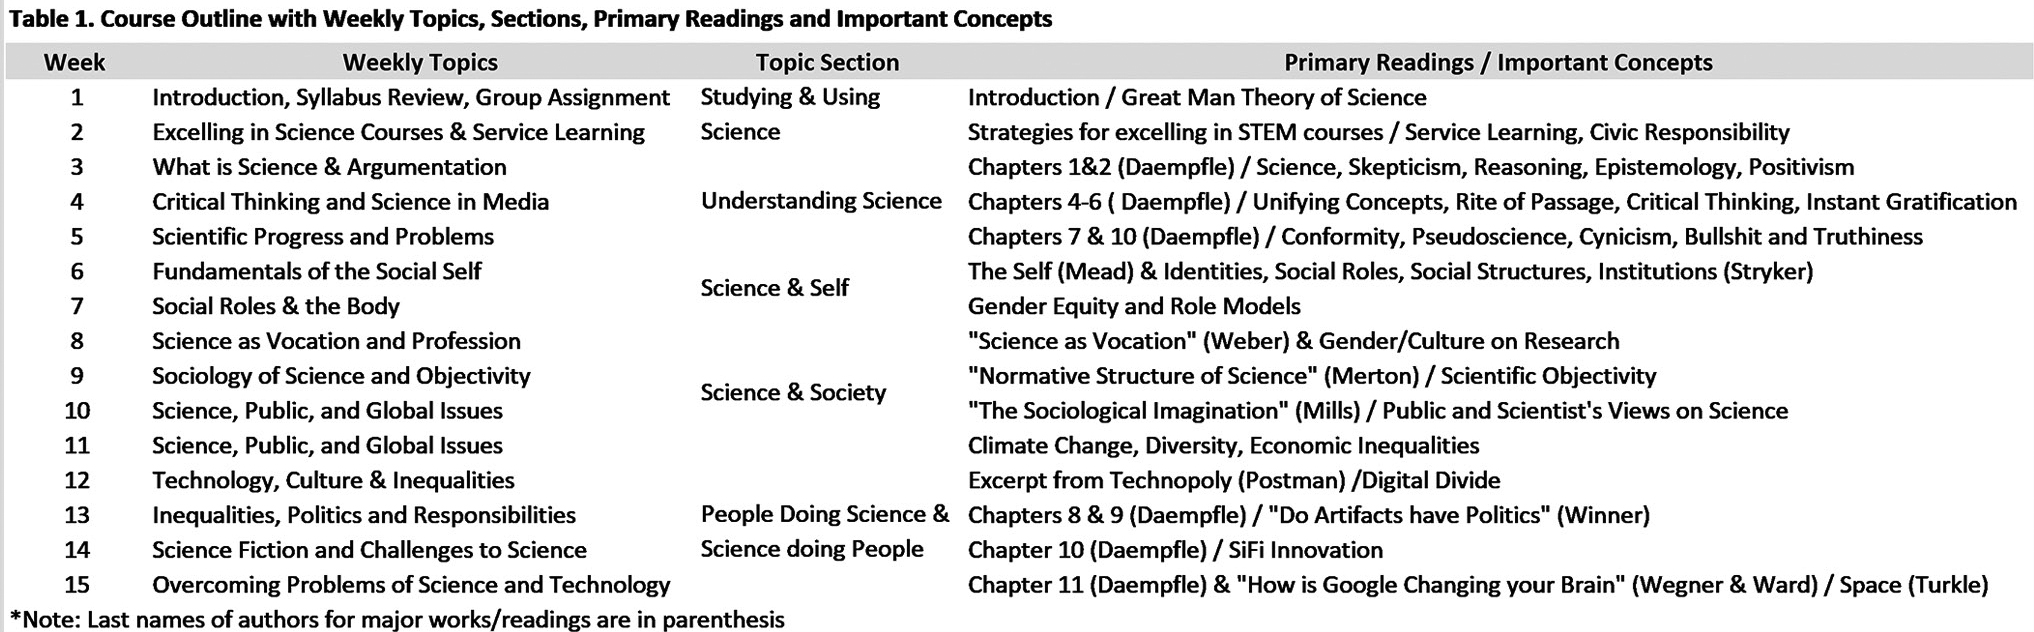 Figure 1 Course outline with weekly topics, sections, primary readings, and important concepts. 